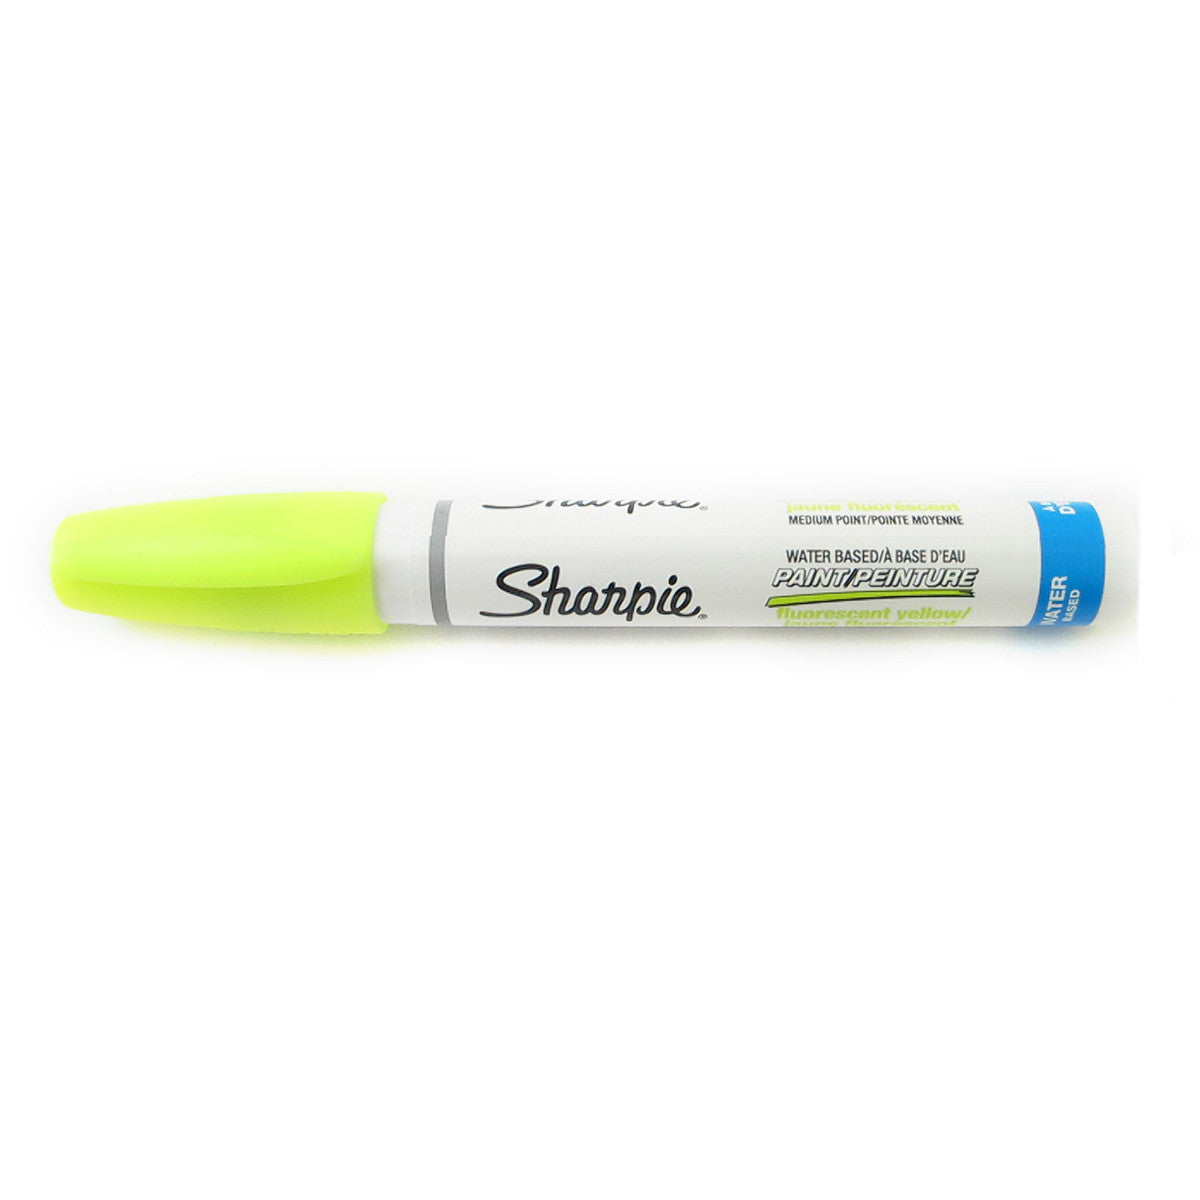 Sharpie Water Based Paint Marker Fluorescent Yellow Marker Safe For Kids, Sold Individually  Sharpie Paint Markers